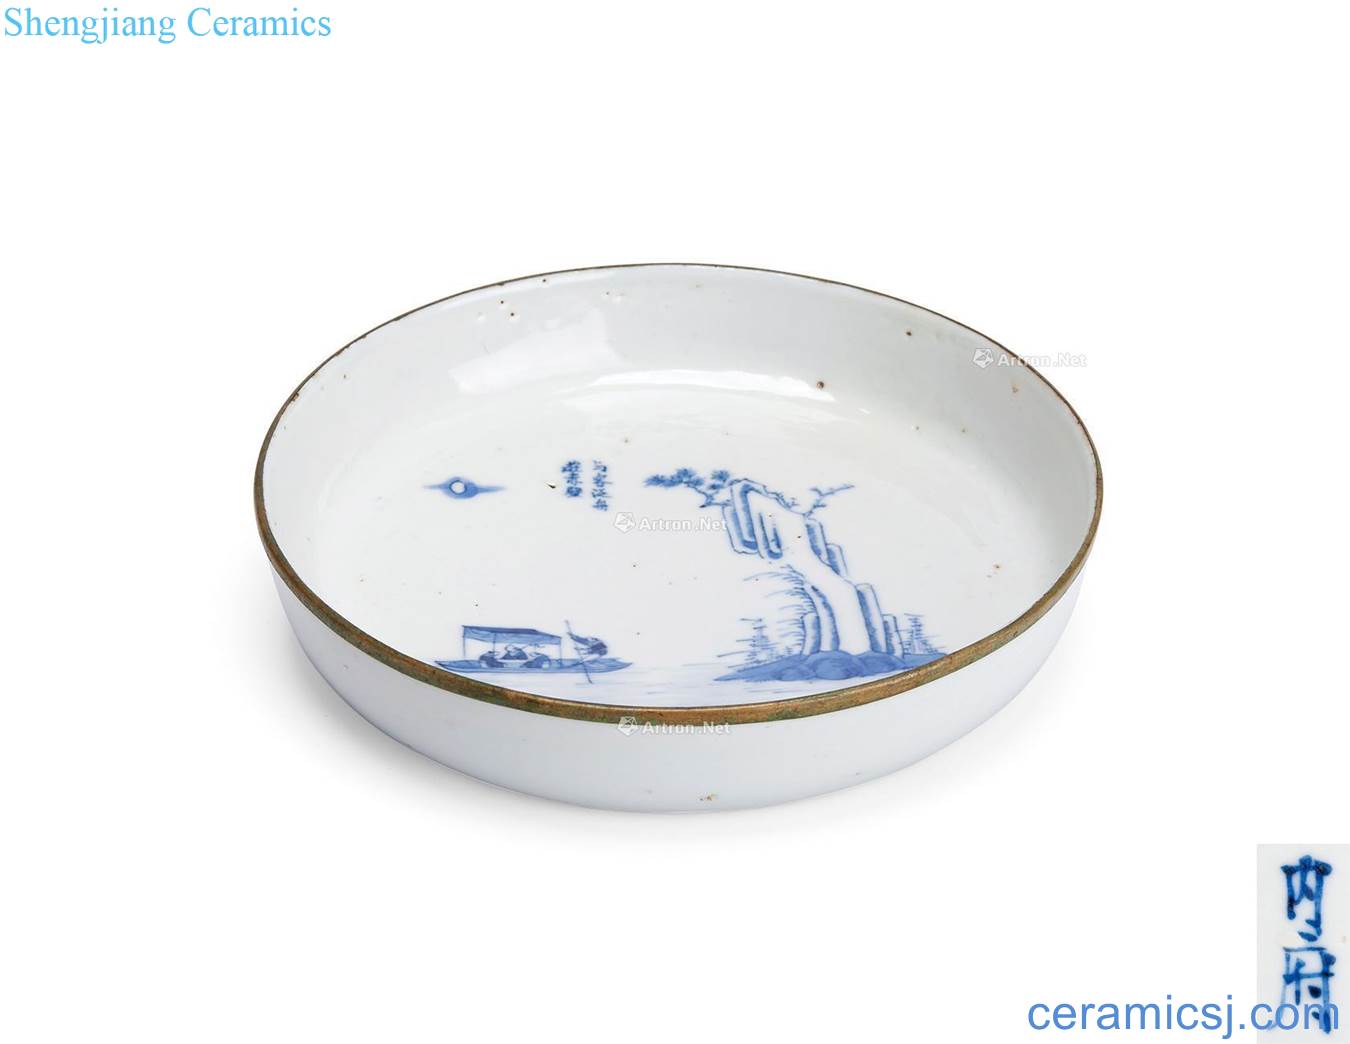 Qing daoguang Blue and red cliff fu xiang dish